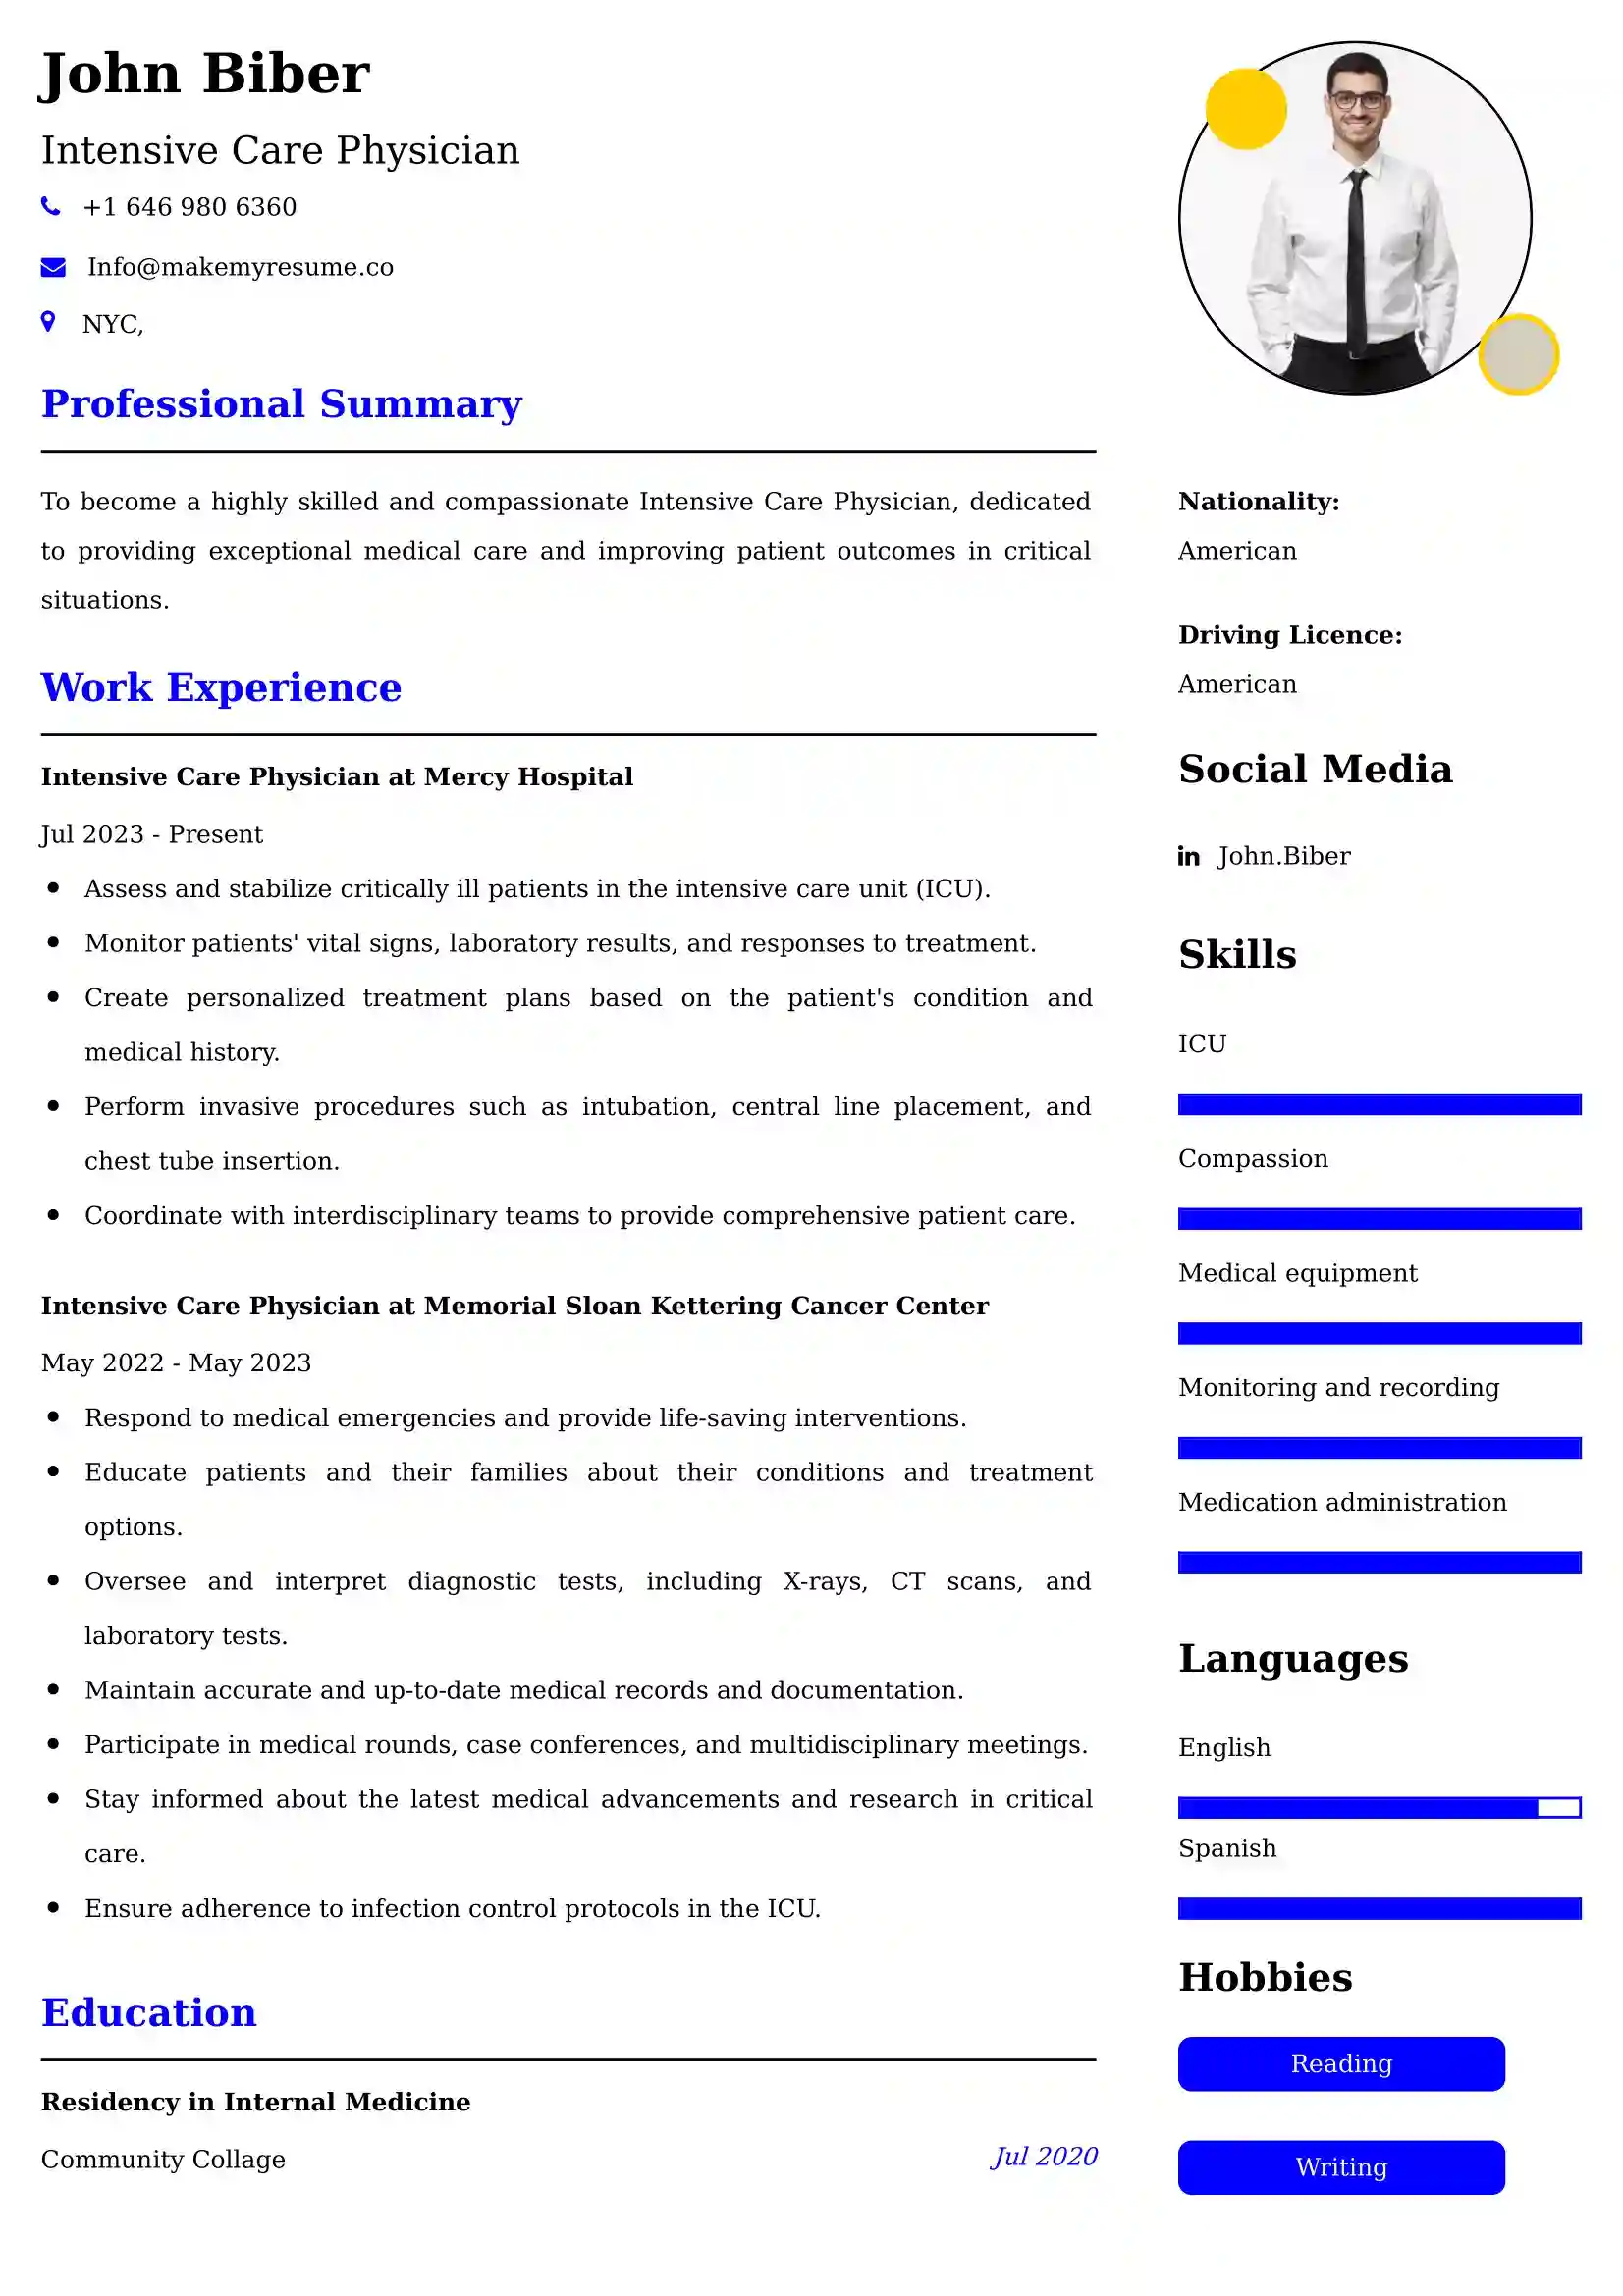 75+ Professional Medical Resume Examples, Latest Format